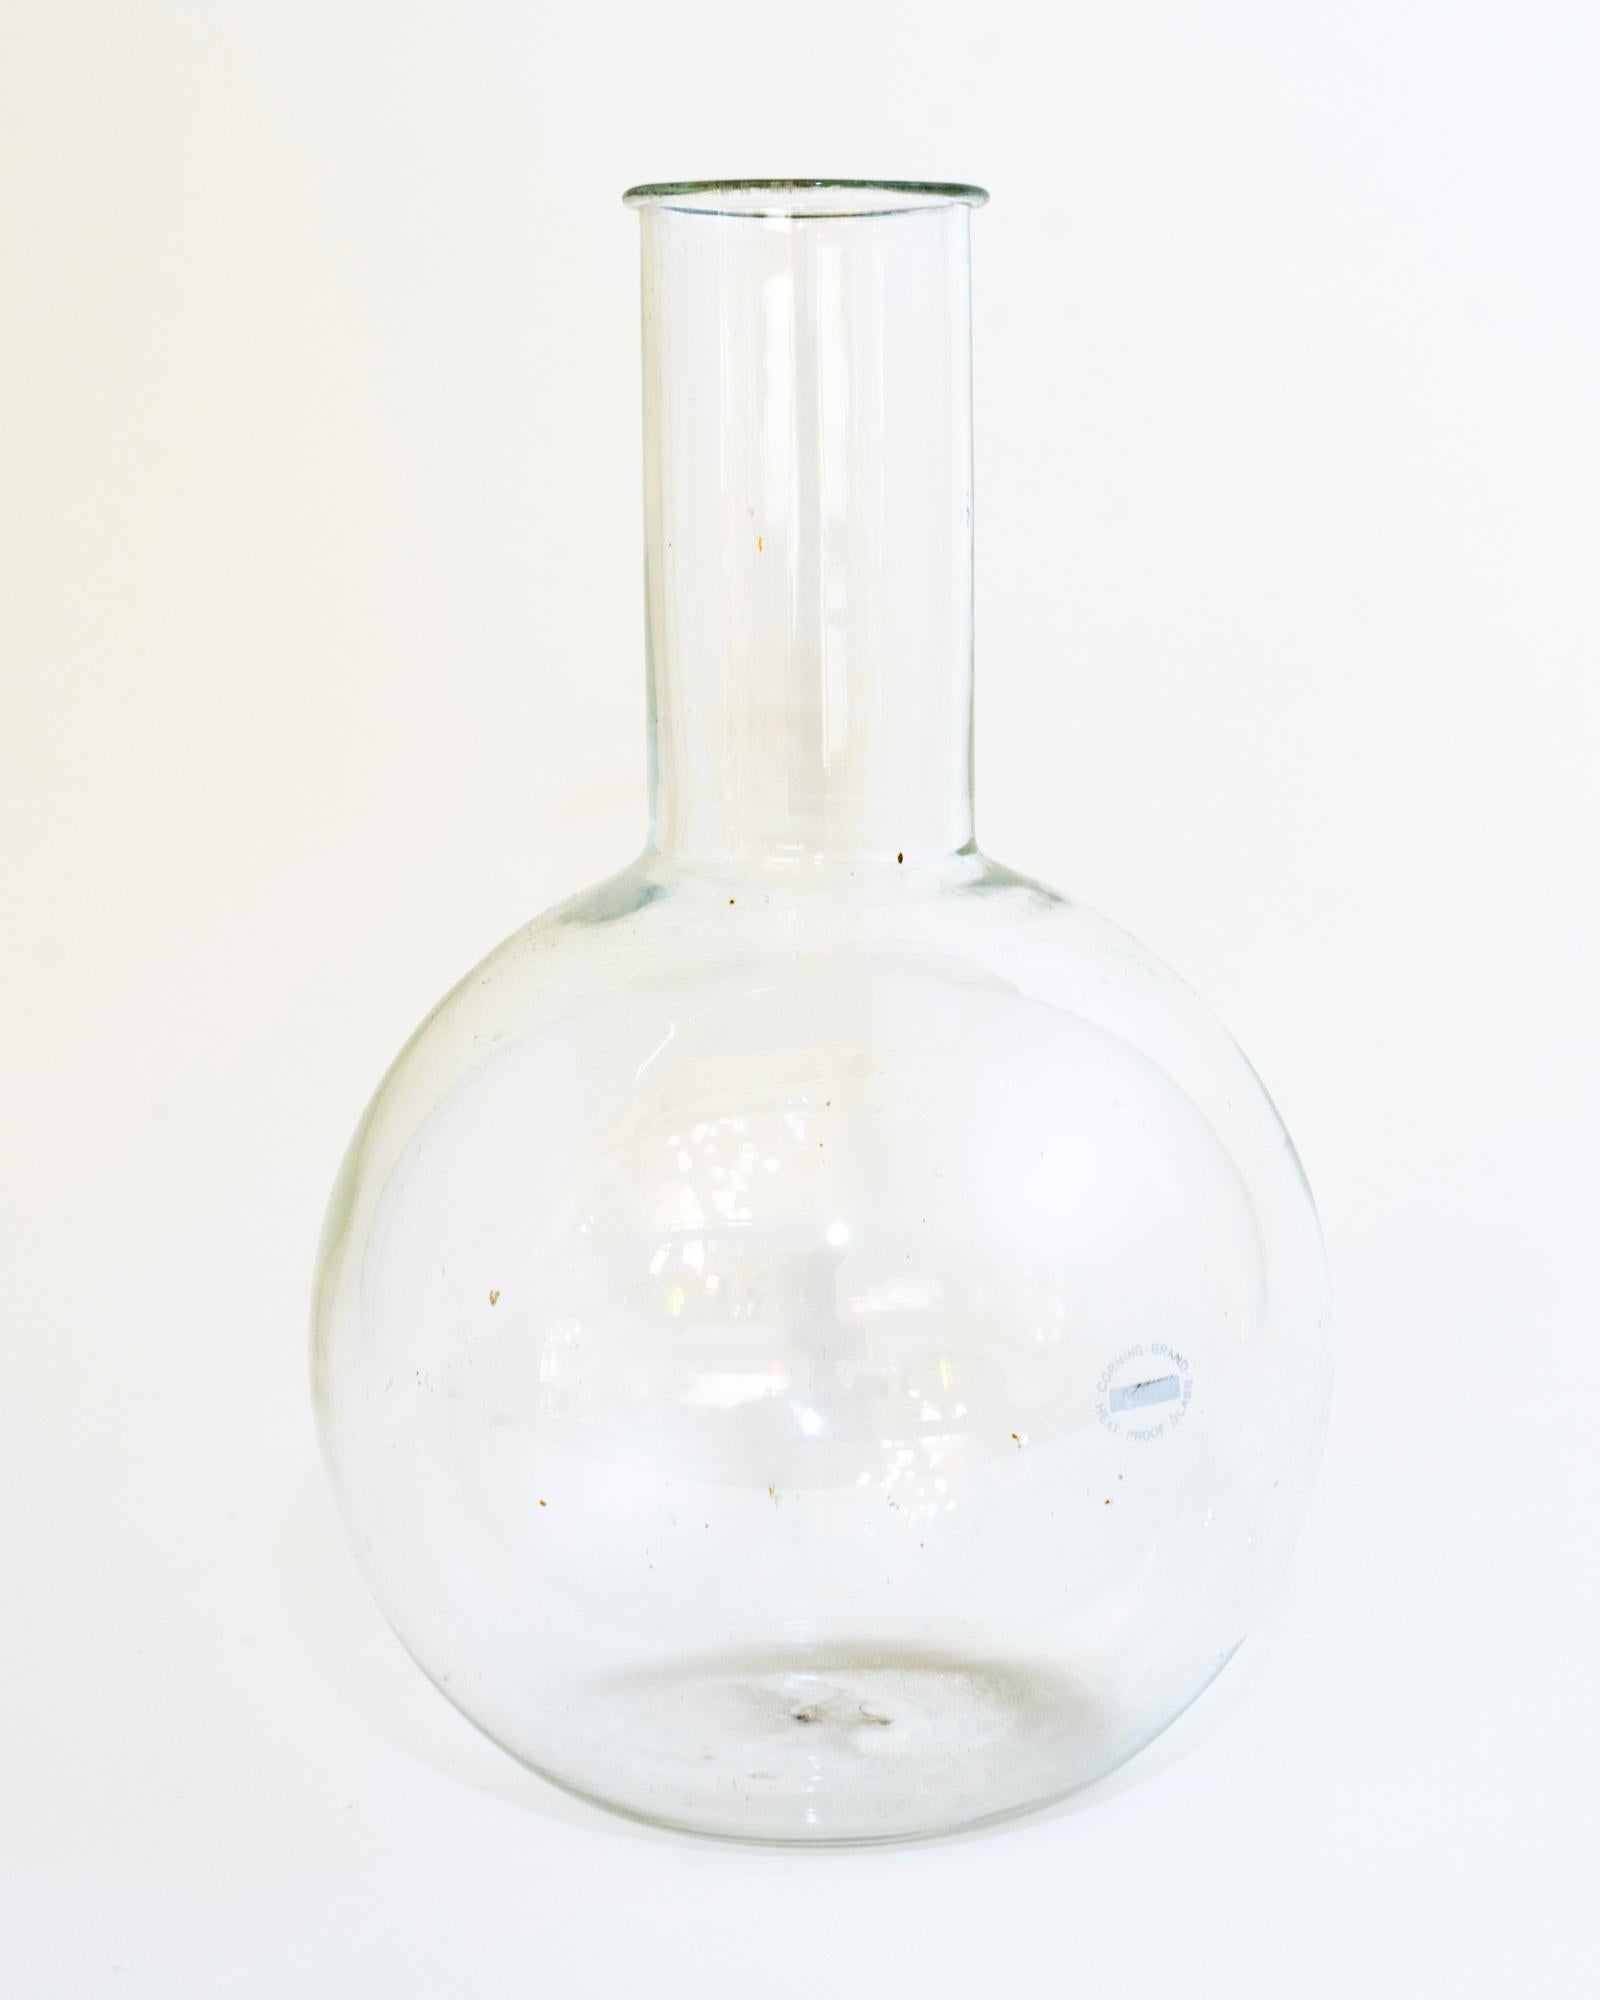 Modern Boiling Flask in Glass, circa 1930s-1960s